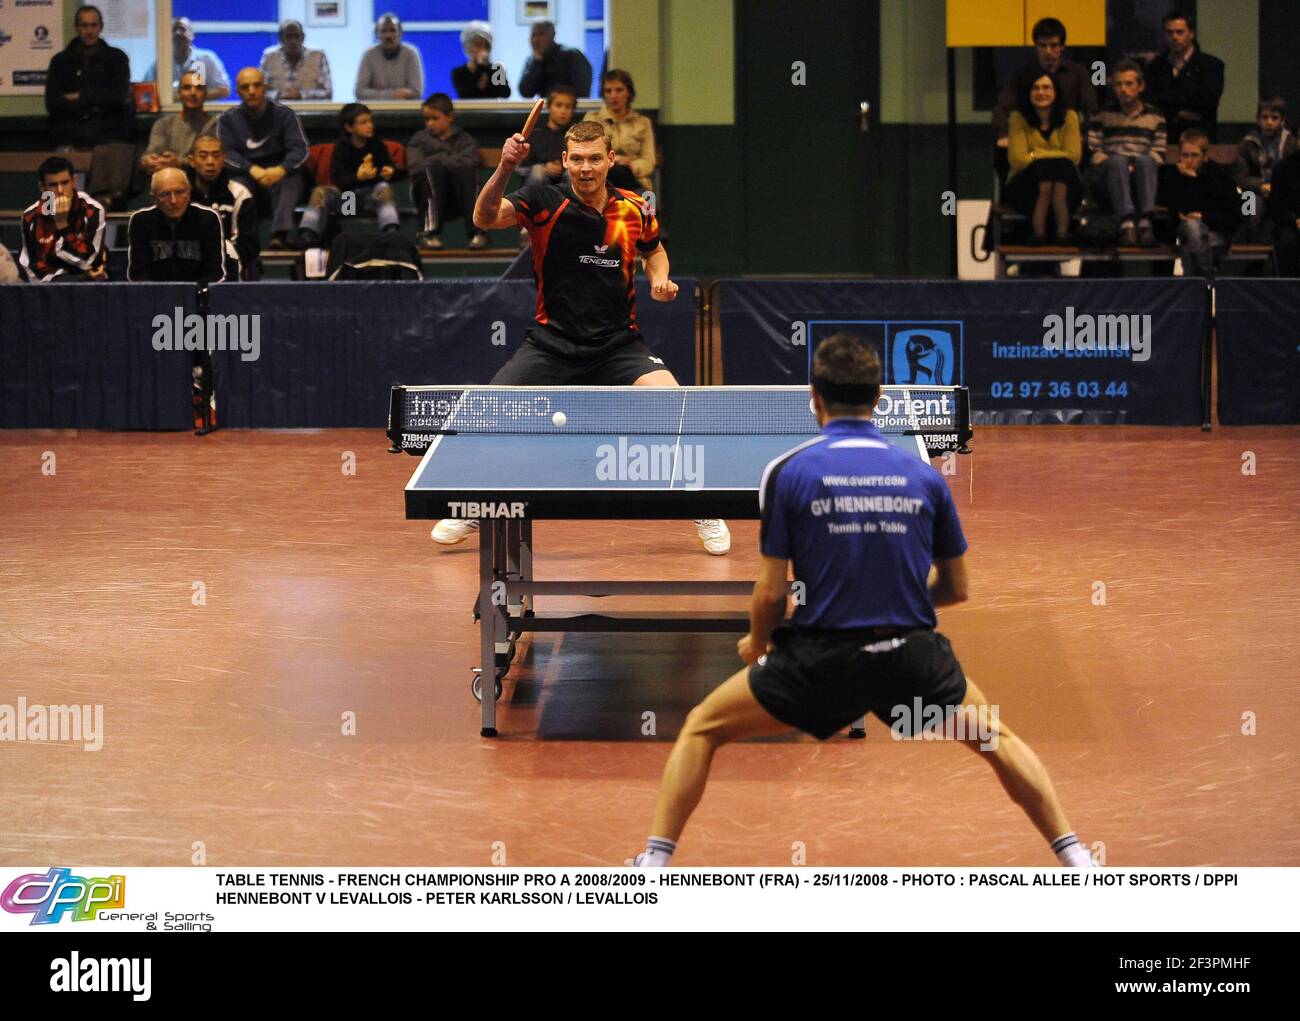 TABLE TENNIS - FRENCH CHAMPIONSHIP PRO A 2008/2009 - HENNEBONT (FRA) -  25/11/2008 - PHOTO : PASCAL ALLEE / HOT SPORTS / DPPI HENNEBONT V LEVALLOIS  - PETER KARLSSON / LEVALLOIS Stock Photo - Alamy